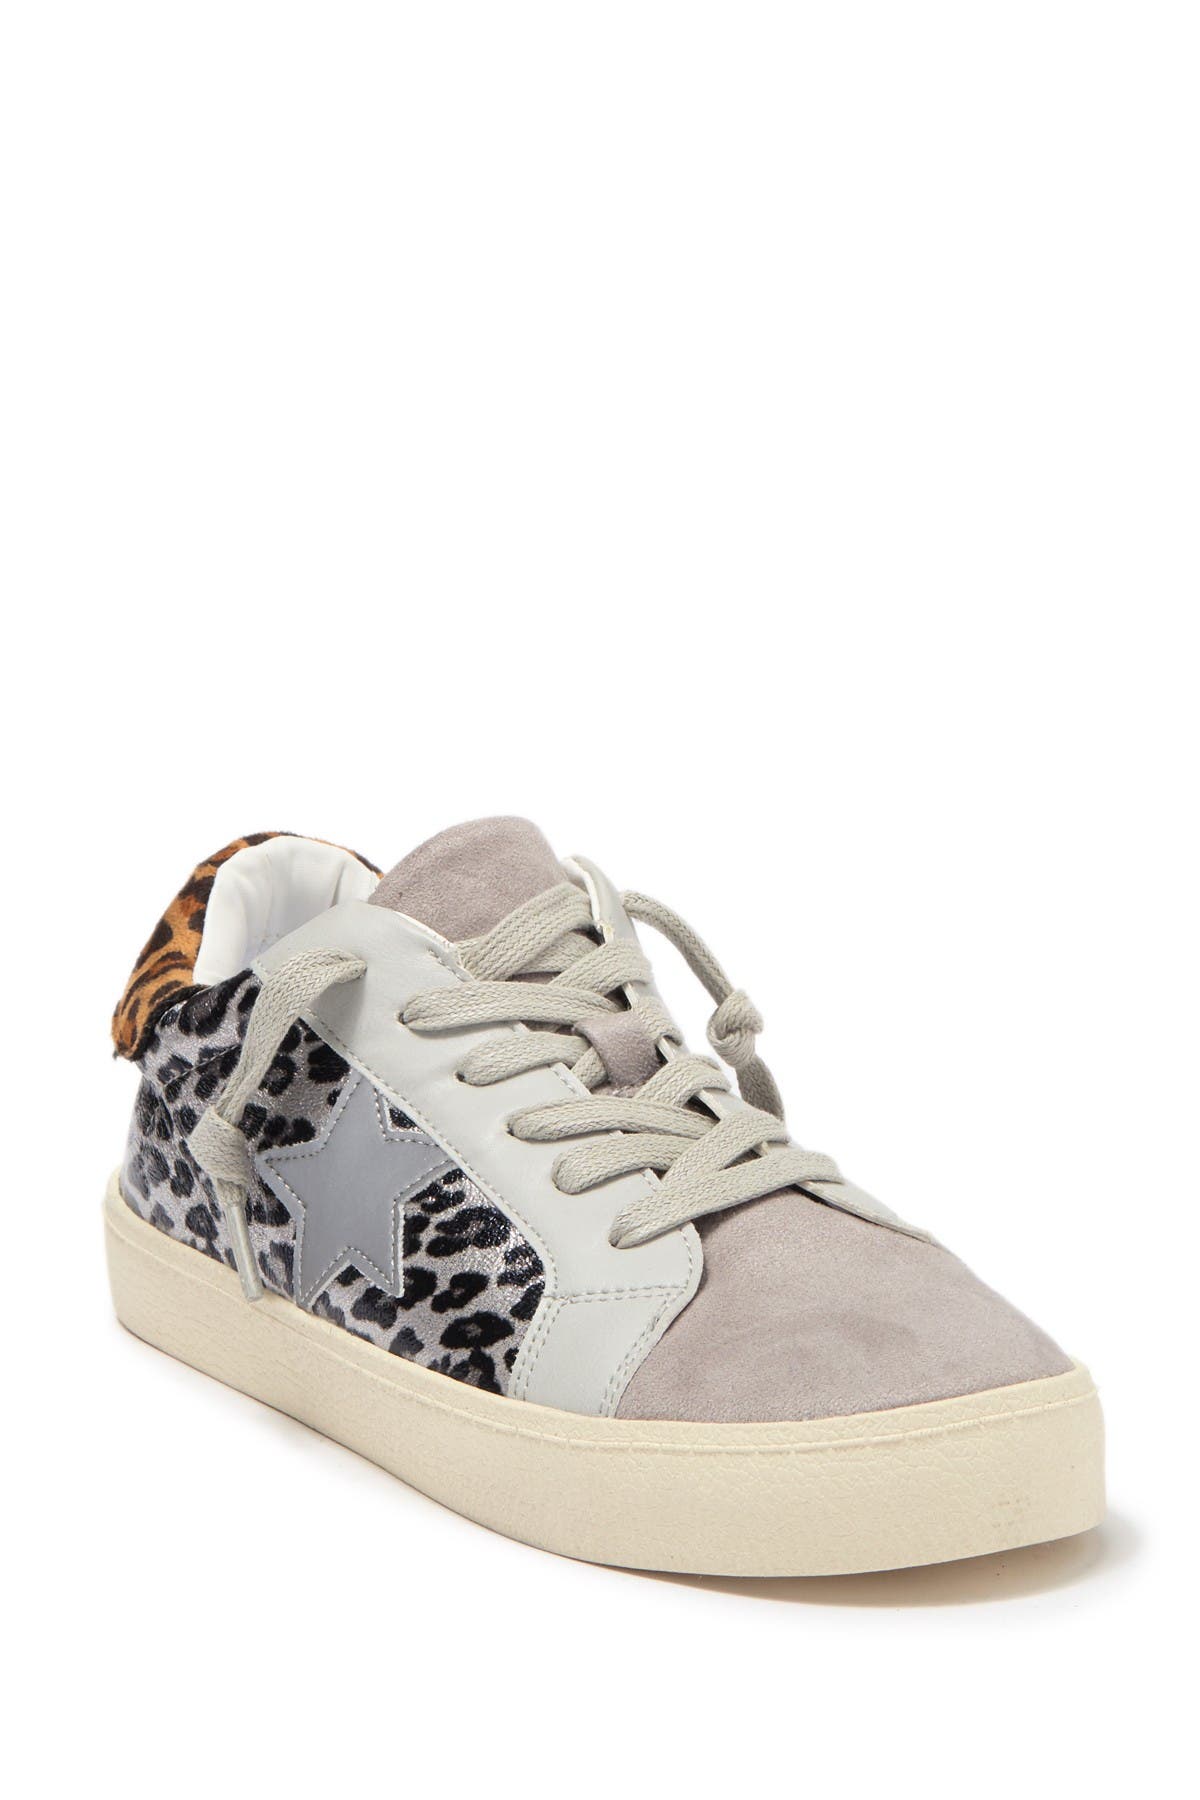 madden girl lace up sneakers